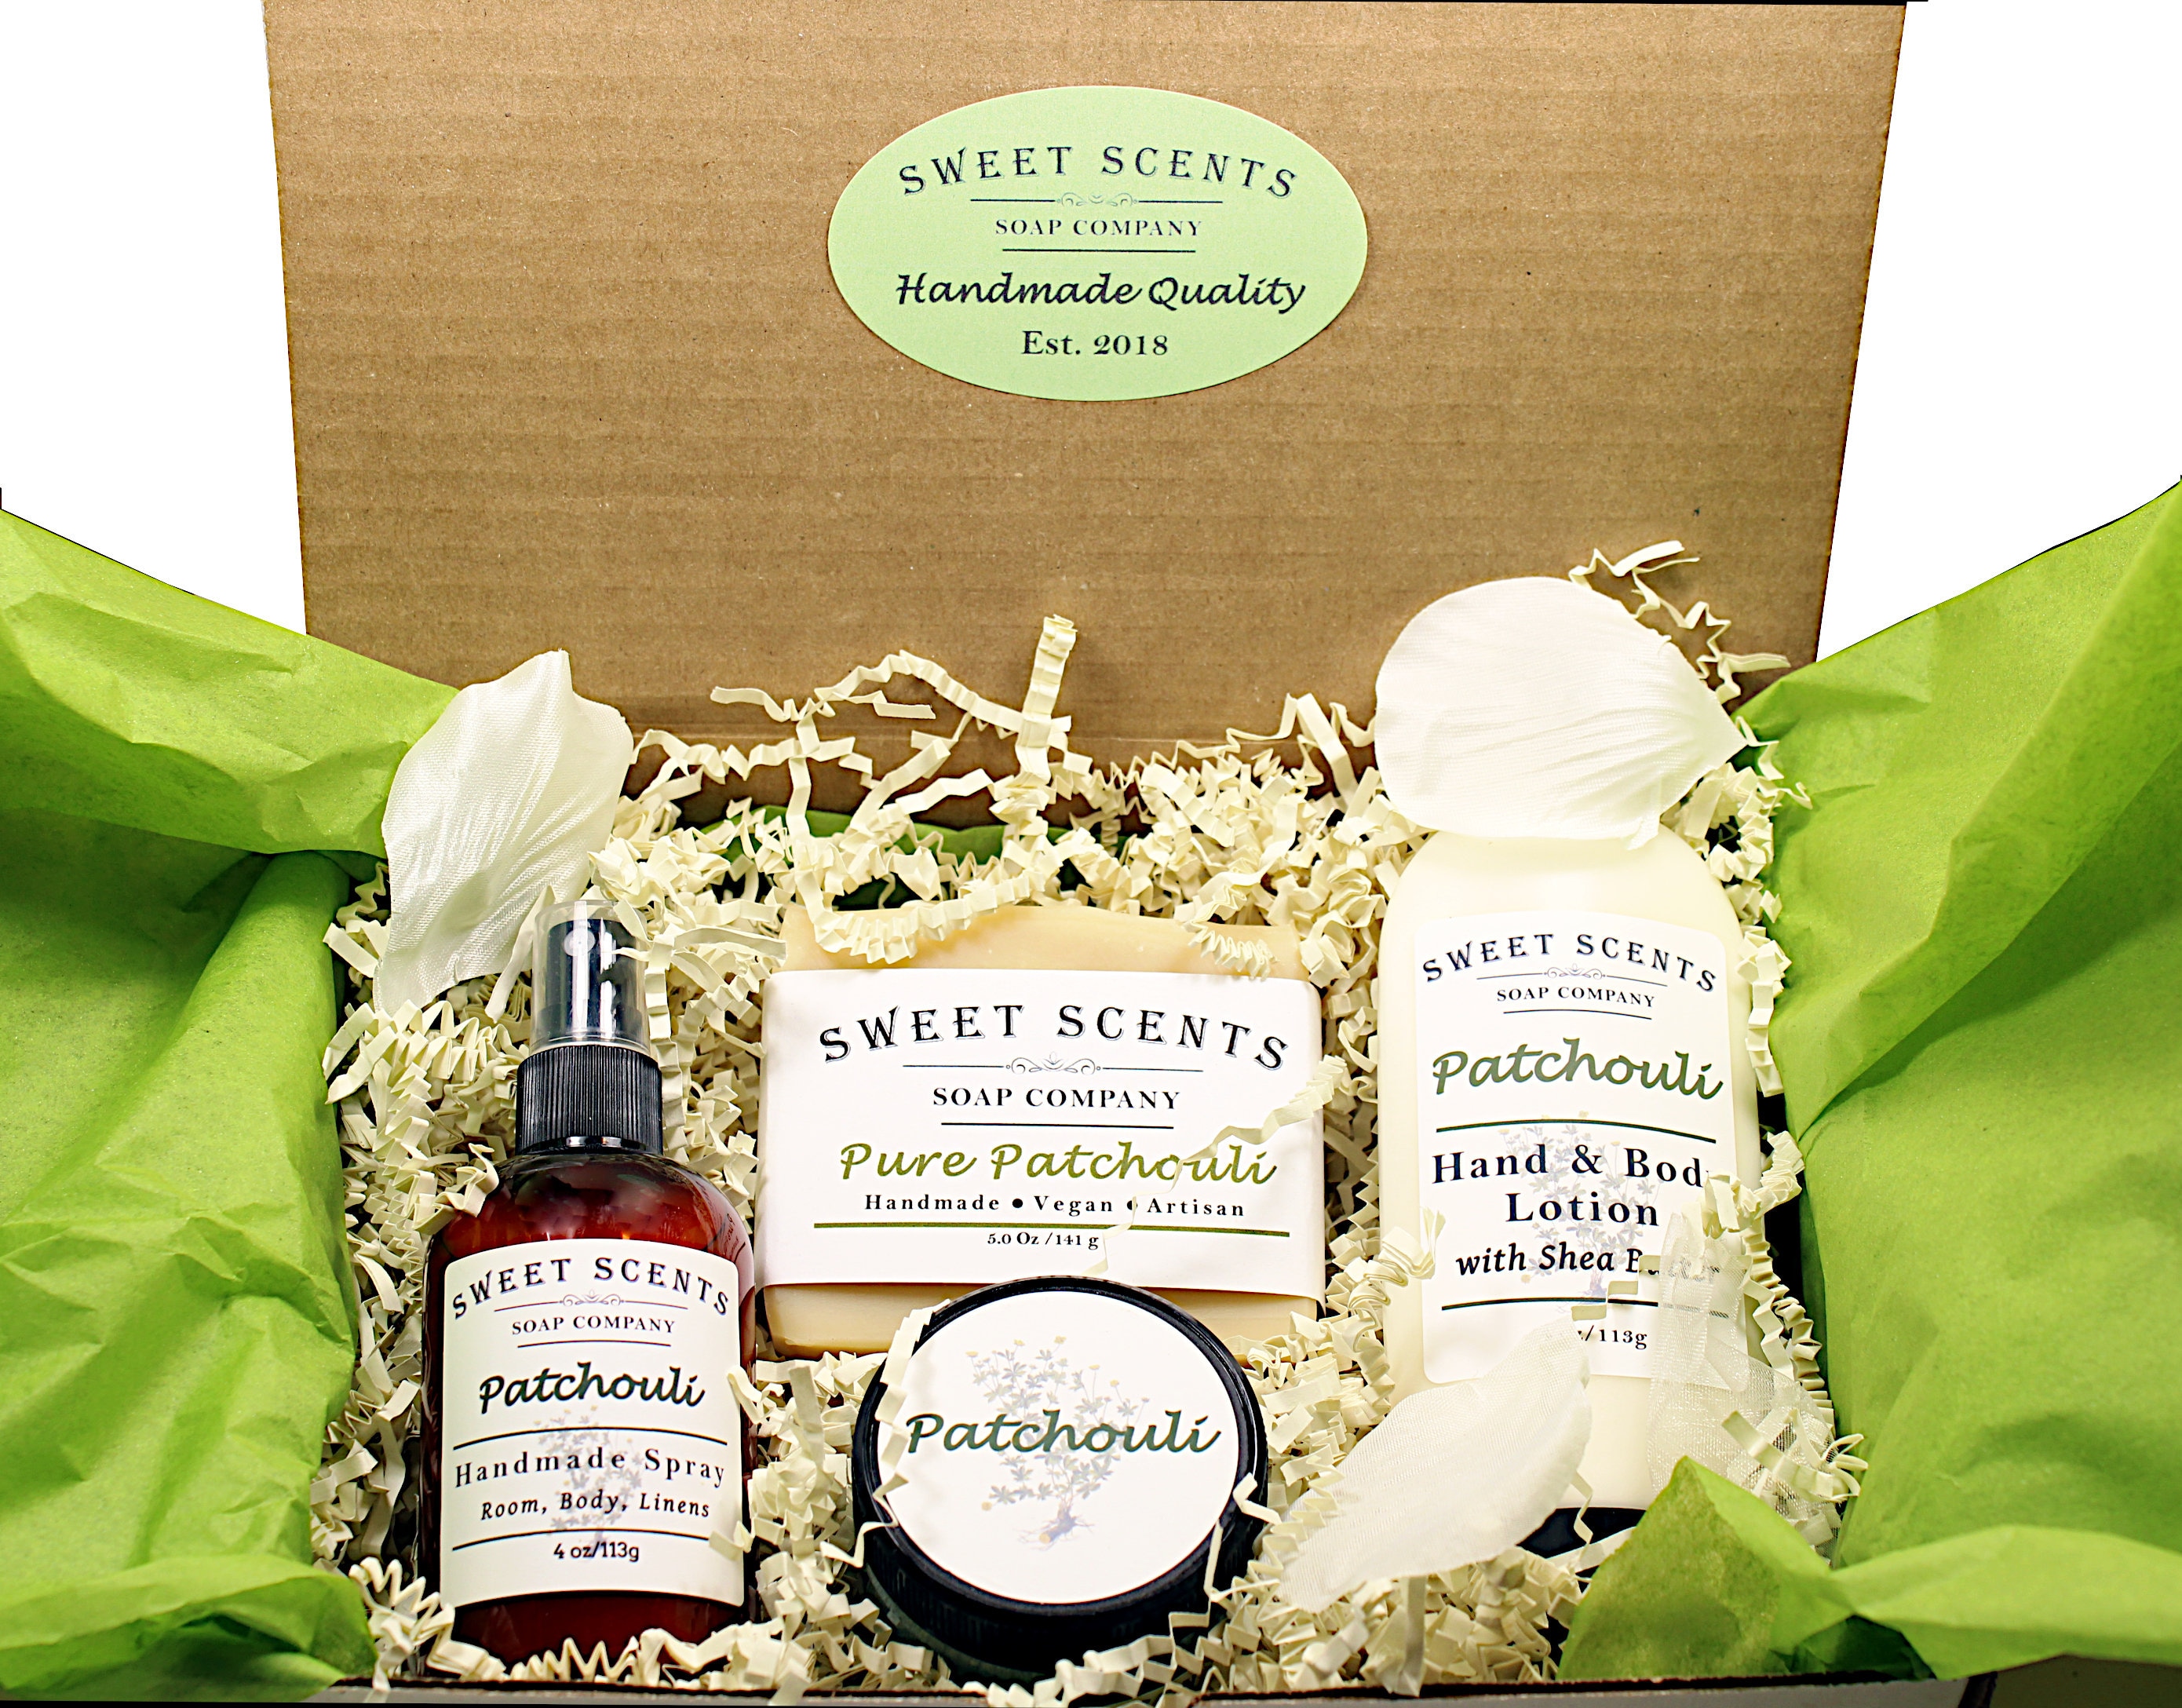  Peacoeye Spa Gifts for Women Valentines Day Gifts Bath Gift  Baskets Relaxing Spa Self Care Gift for Mom Her Sis Wife Home Bath and Body  Works Care Package Thank You Gift